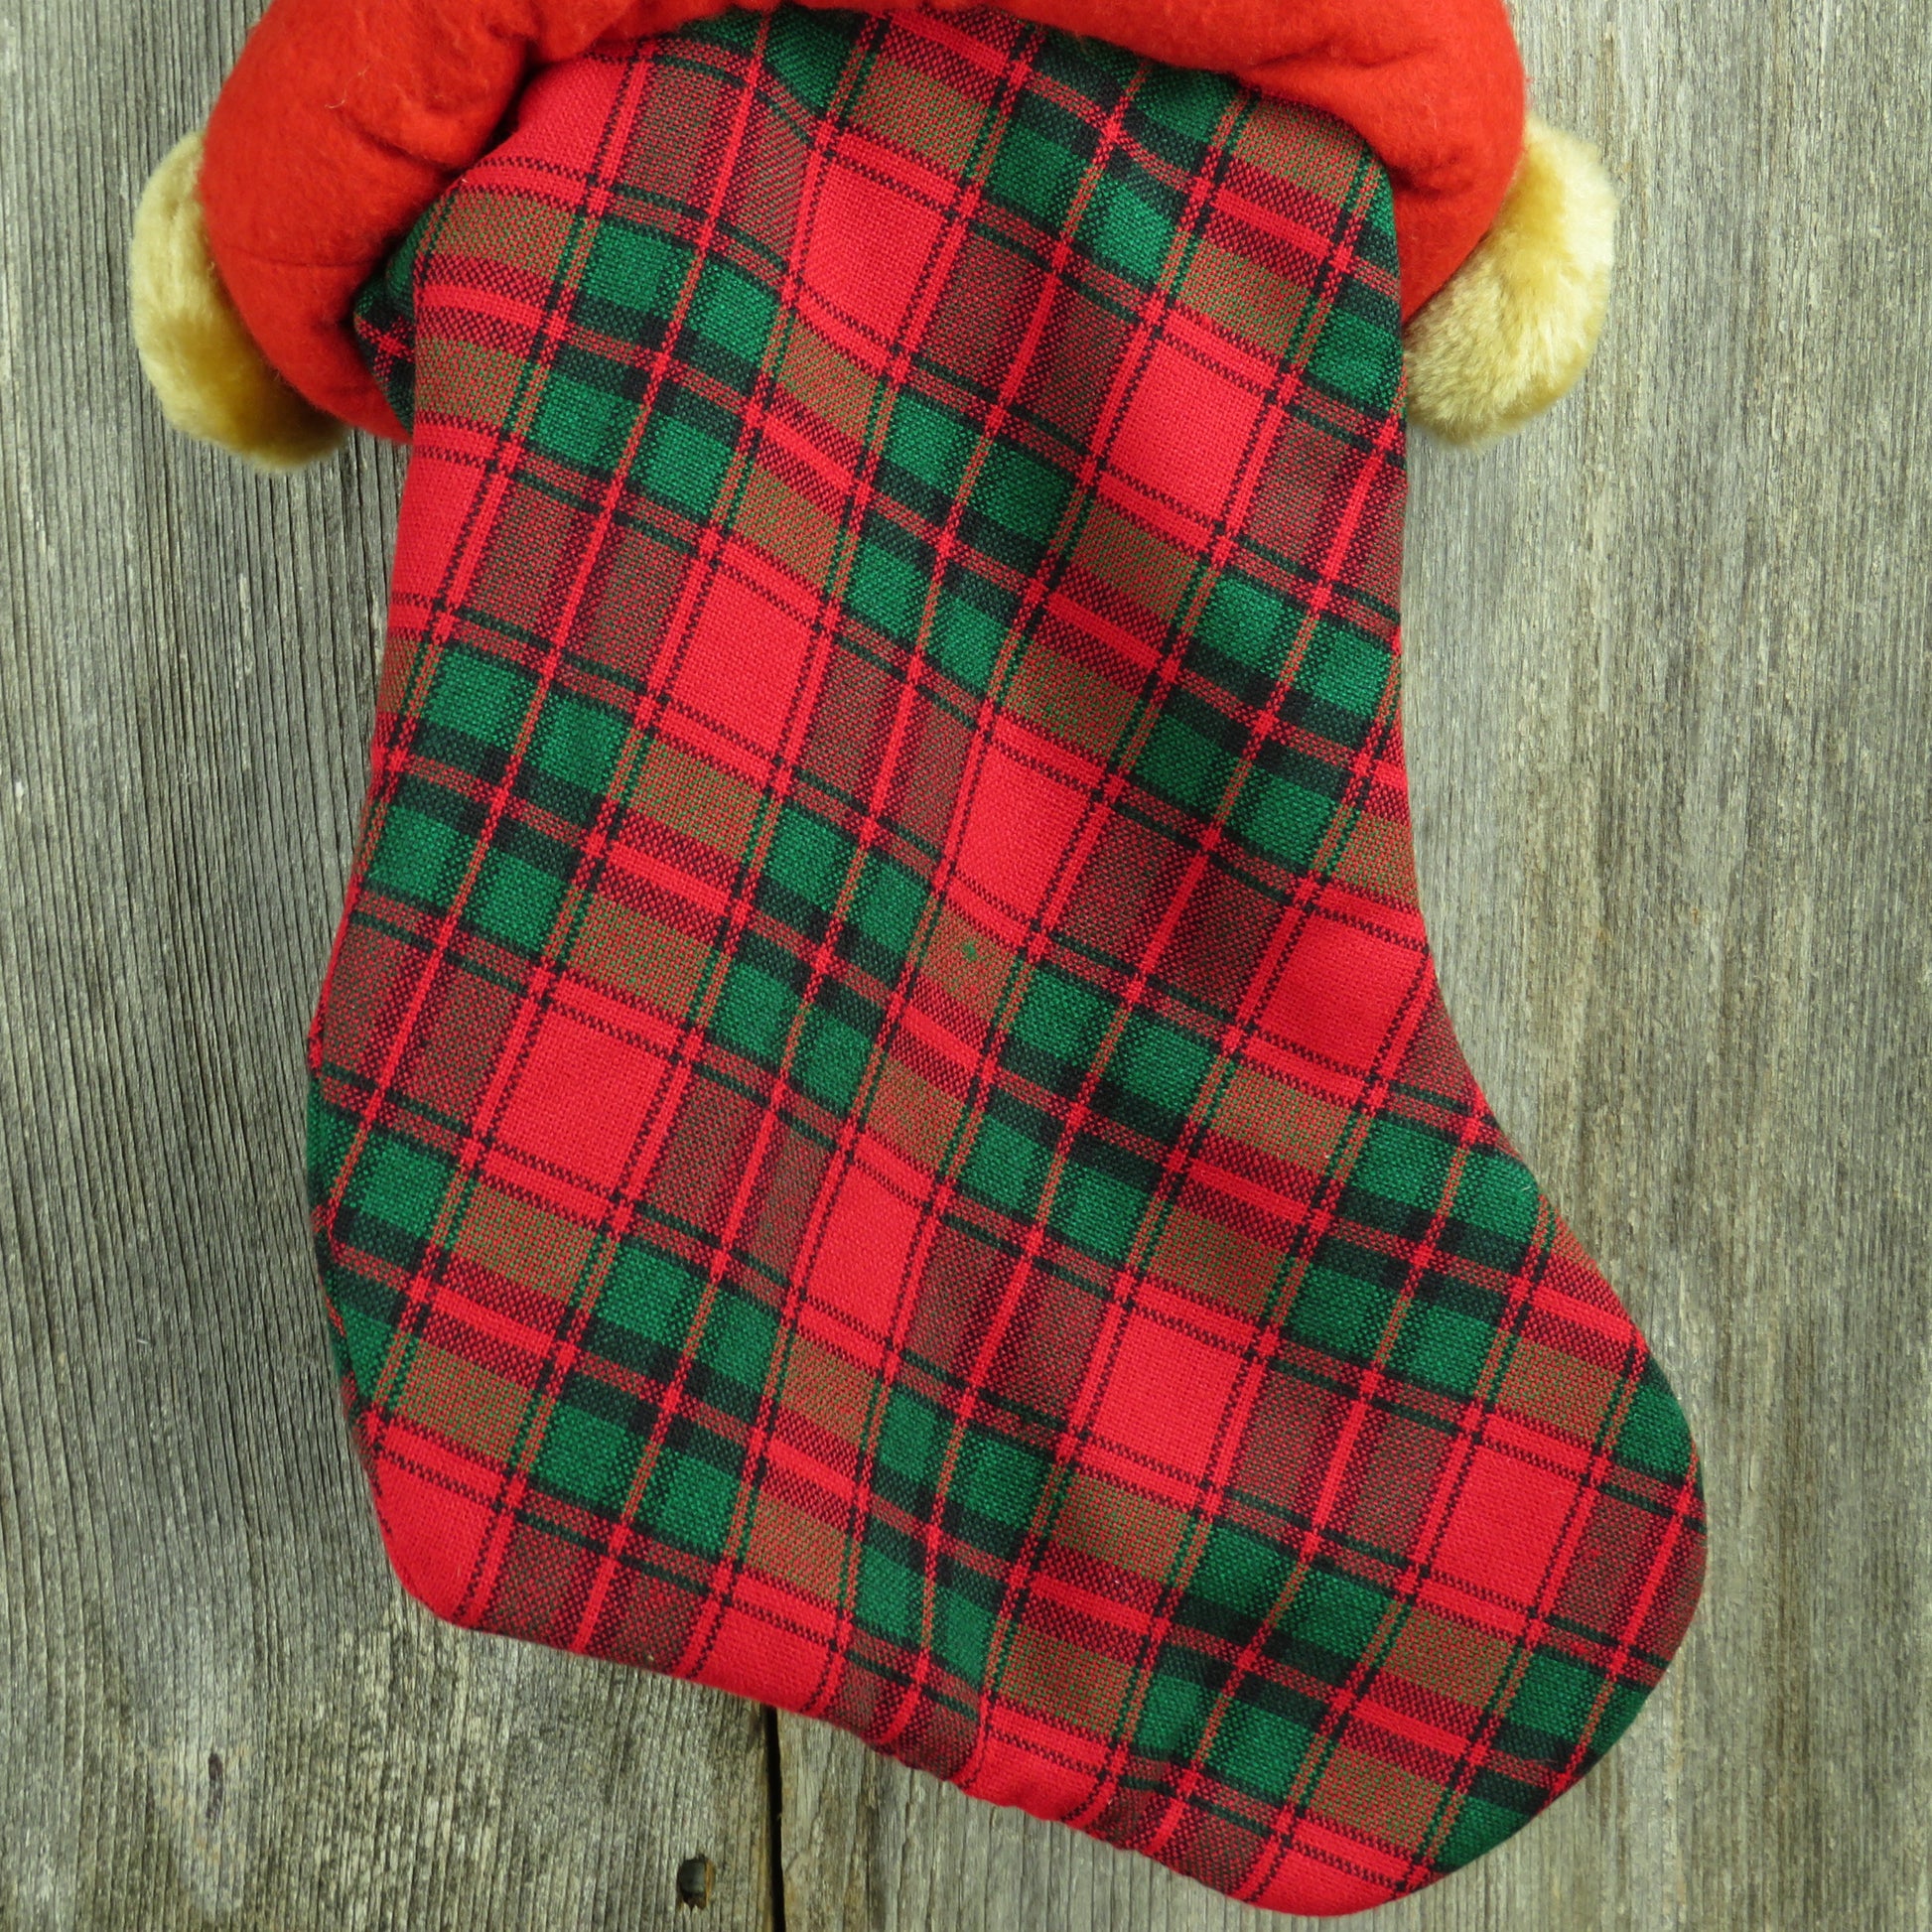 Vintage Reindeer Plaid Plush Christmas Stocking Red Green Candy Cane - At Grandma's Table